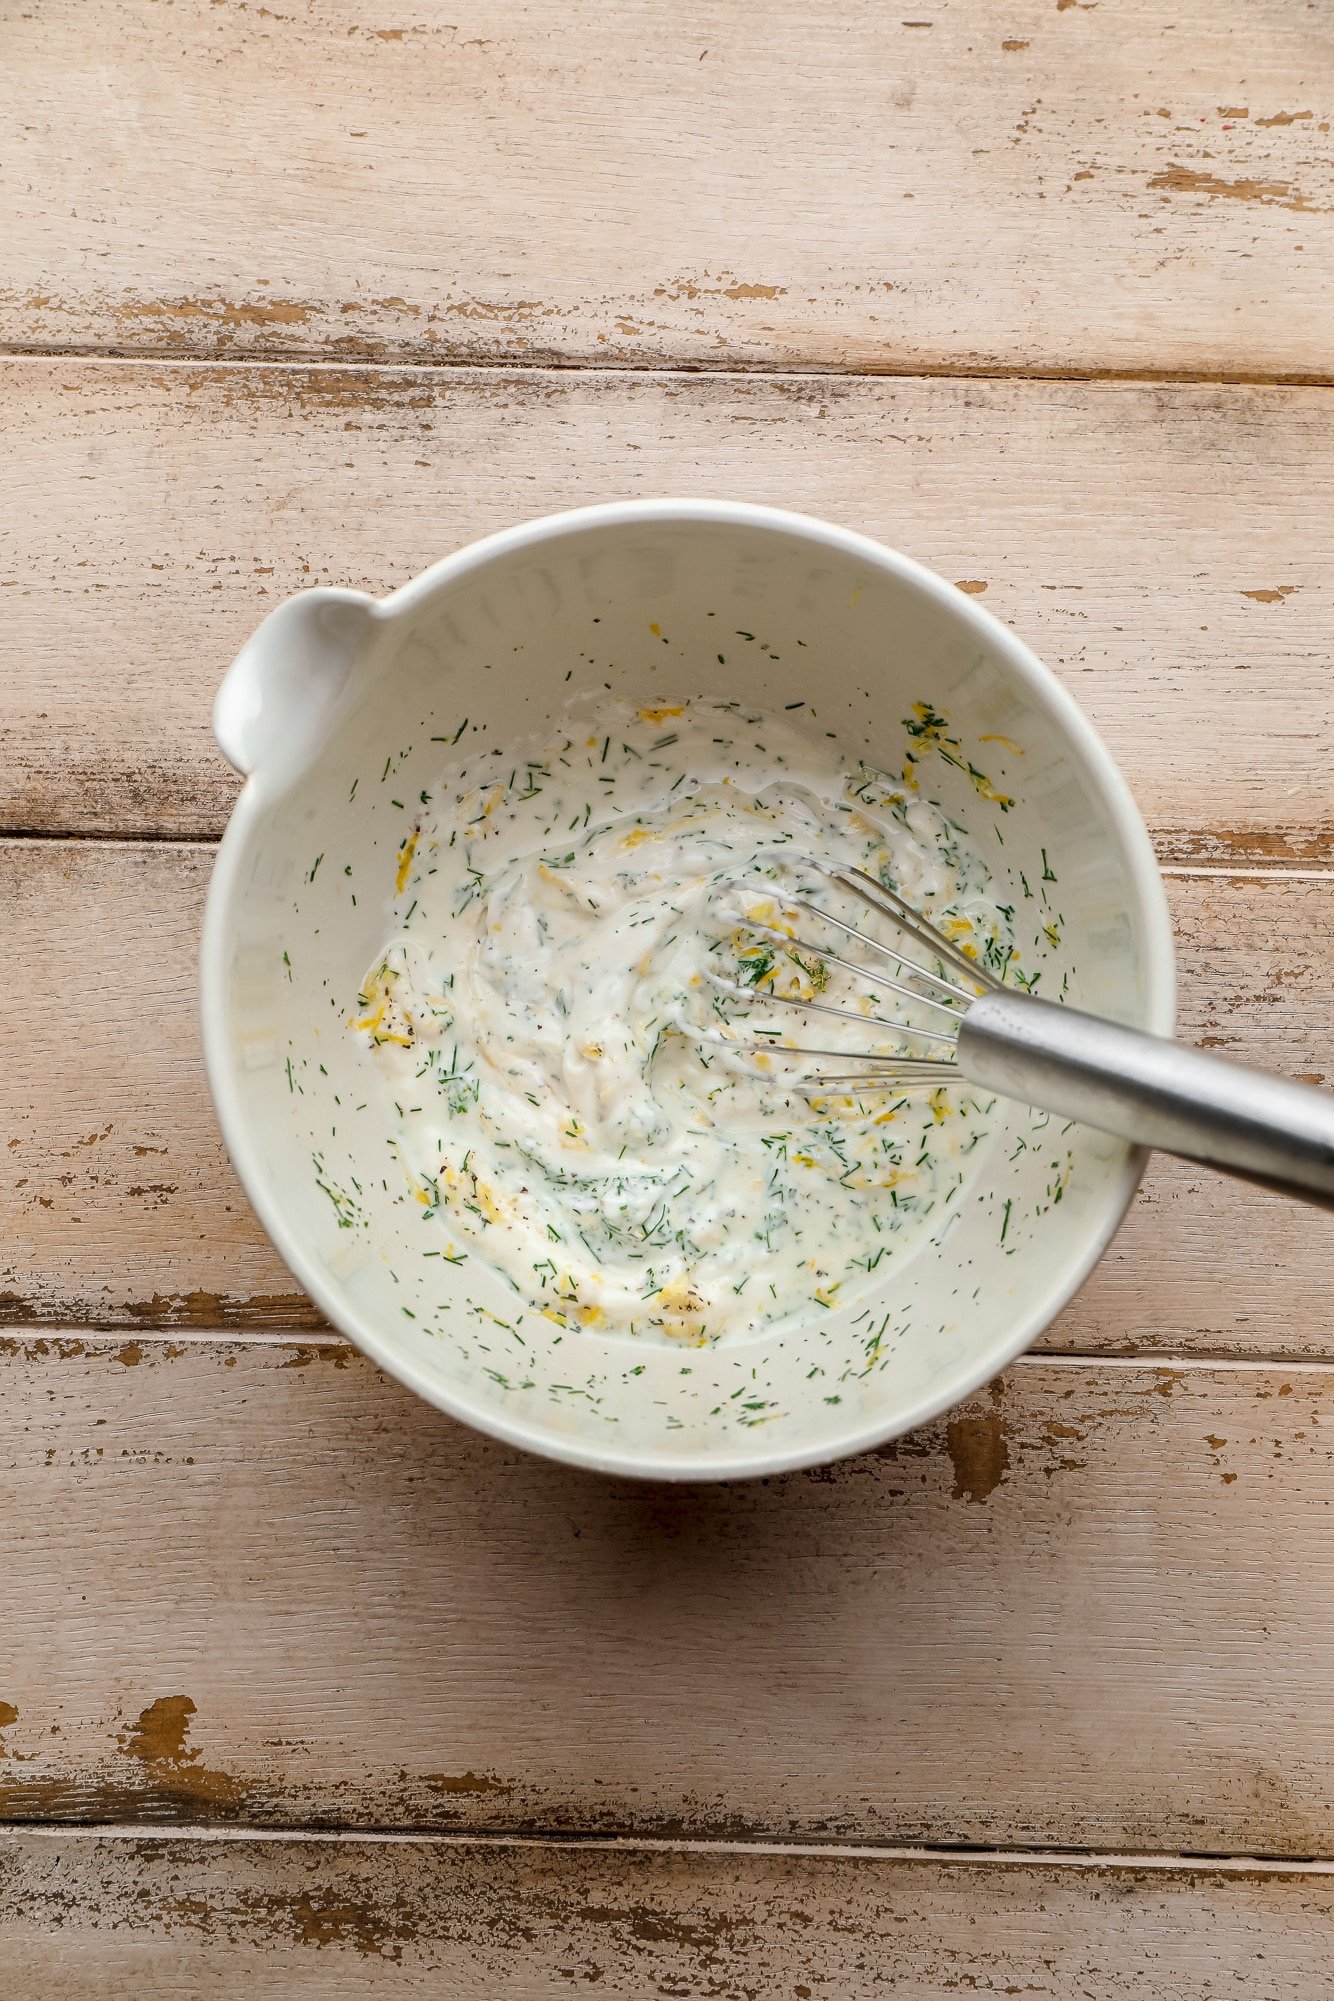 whisking lemon dill sauce ingredients together in a white bowl.